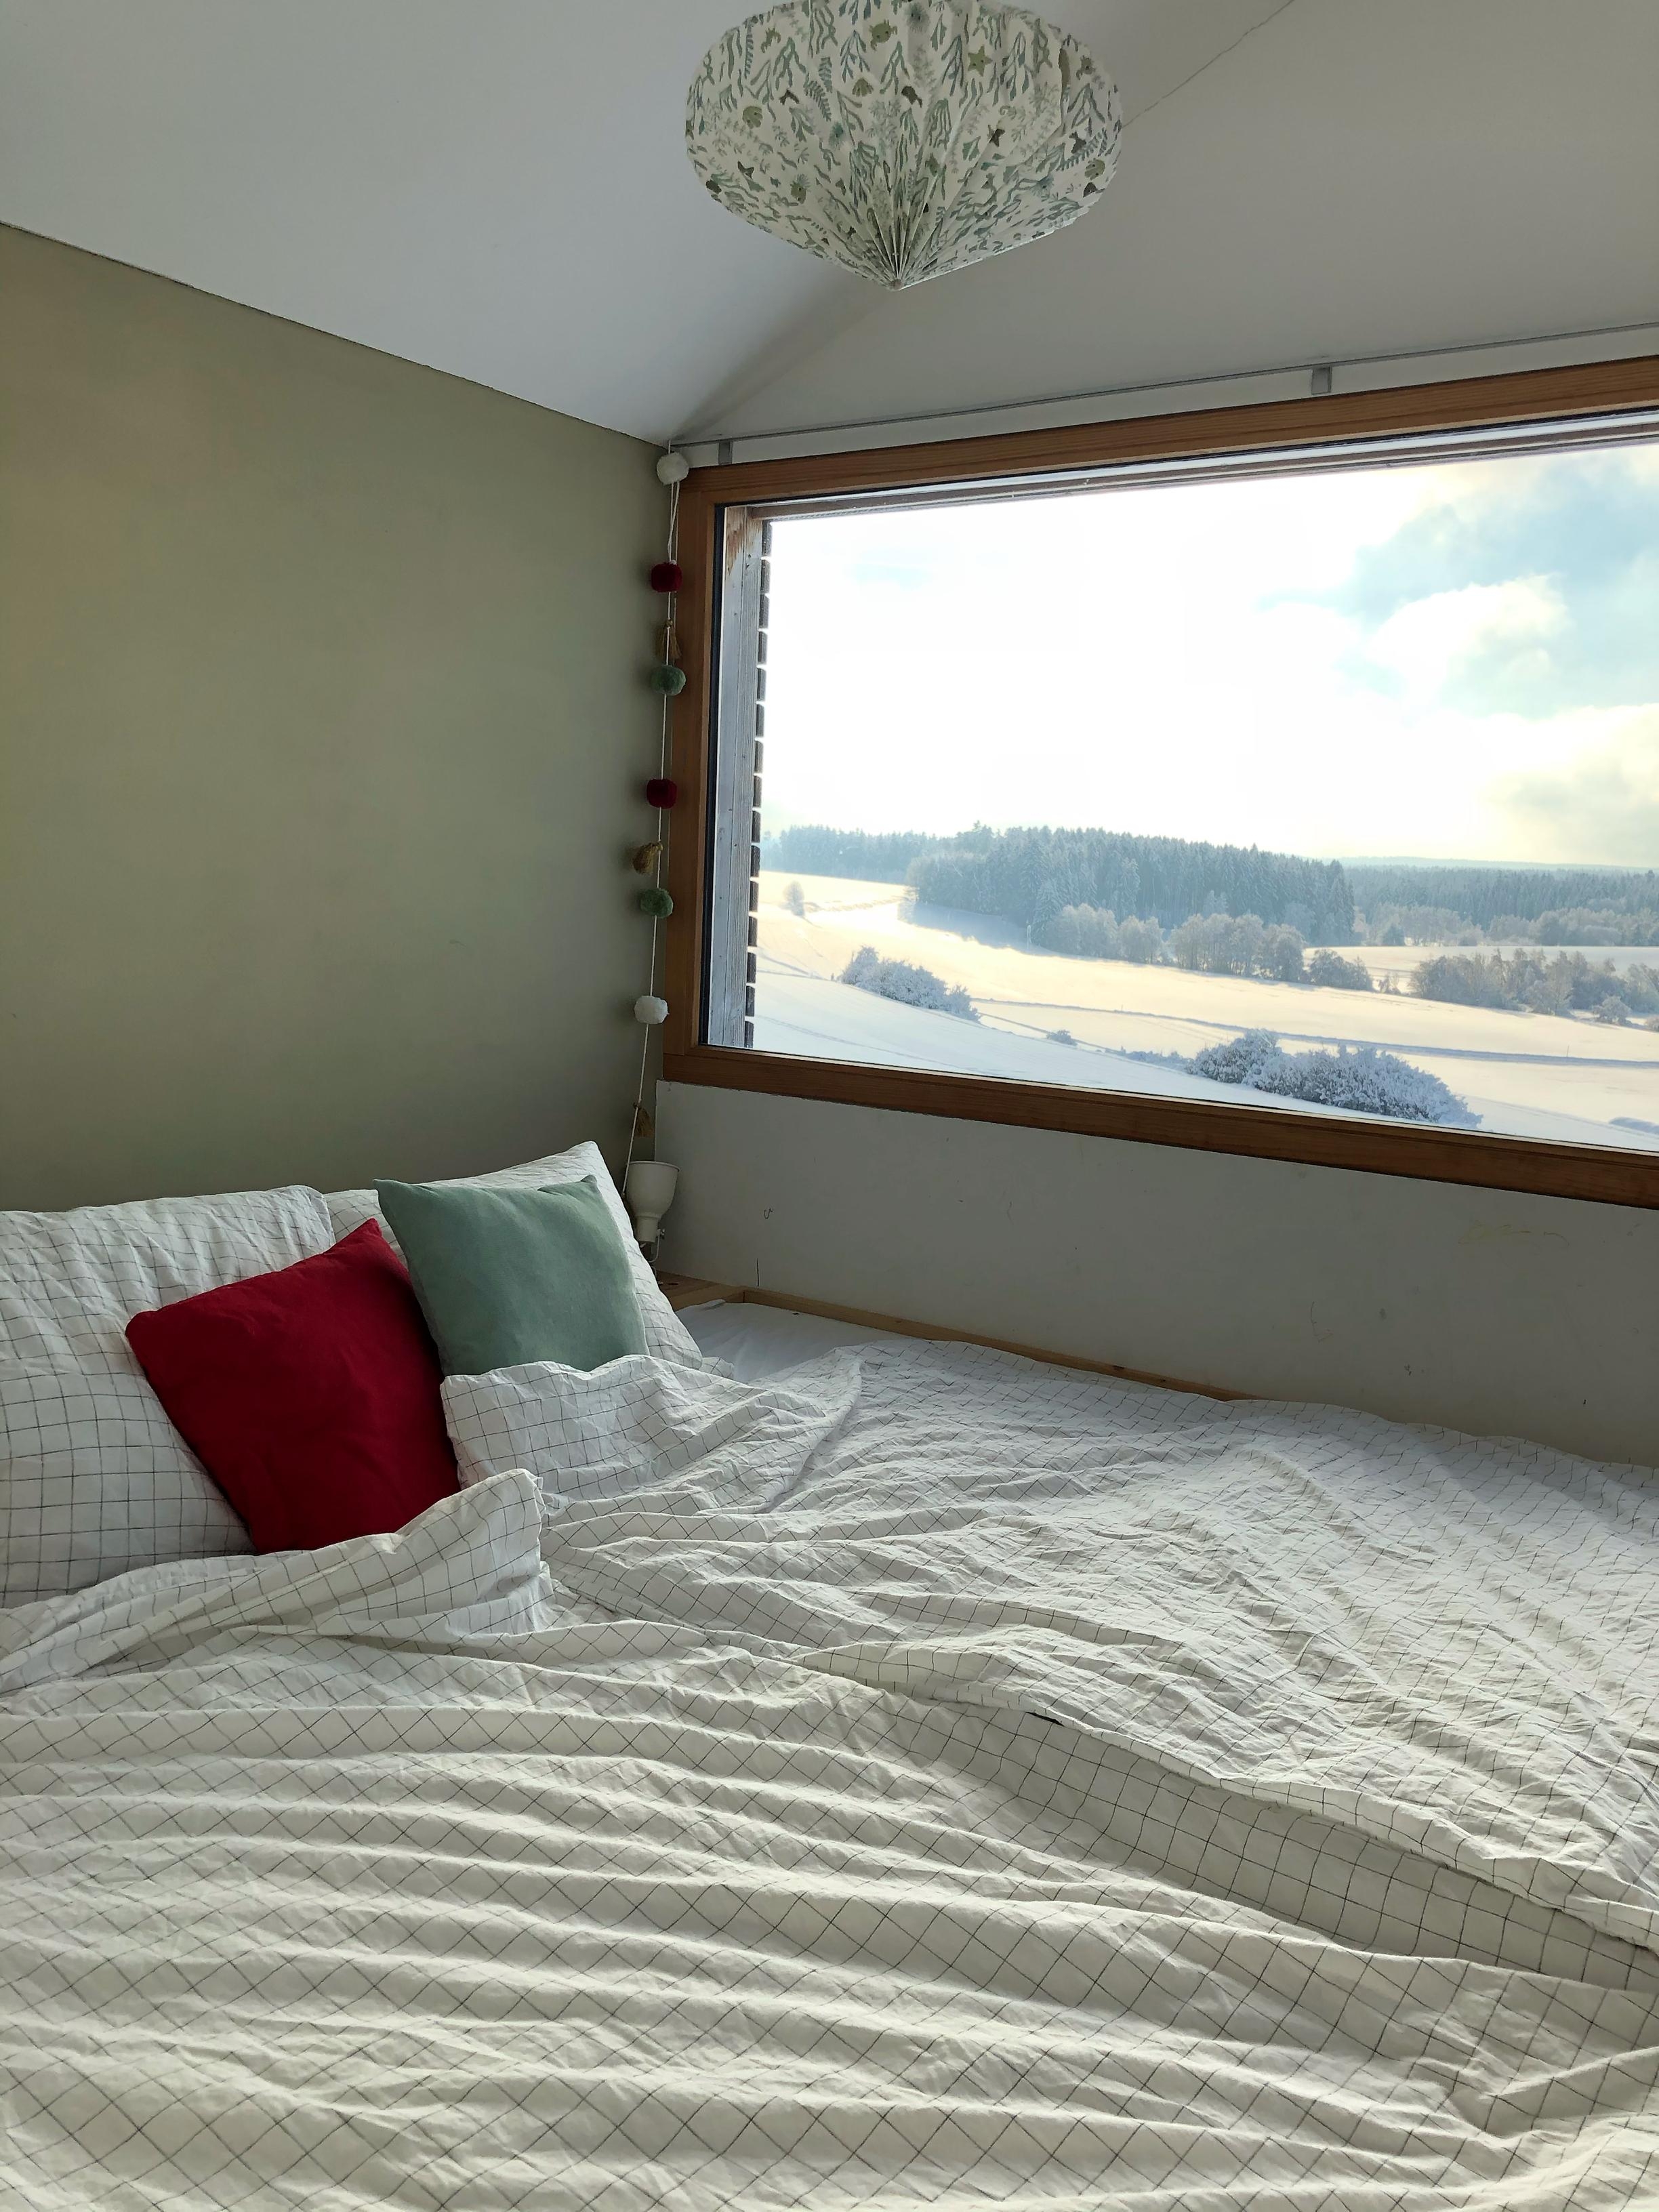 #bett #cozy #view
Wake up with a view